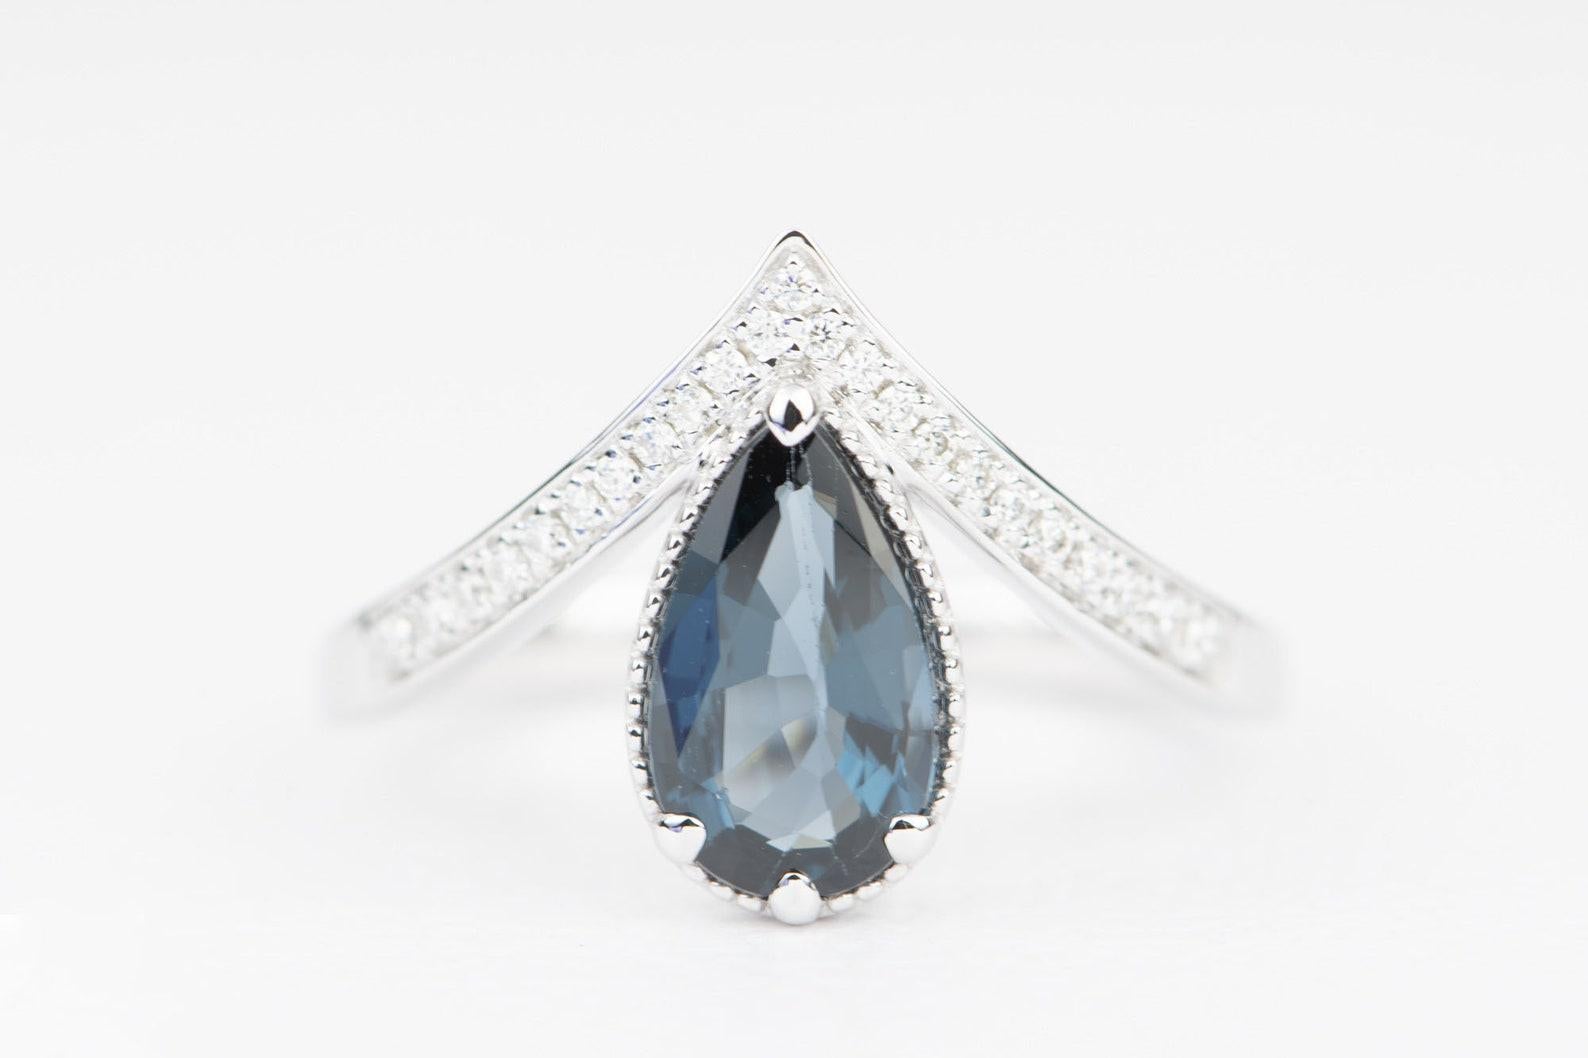 â™¥  This is a vintage-inspired ring featuring a beautiful blue spinel in the center with a delicate milgrain edge, set on a curved shank with sparkly white moissanites
â™¥  This is a natural spinel mined from Mogok, Myanmar, not a synthetic one